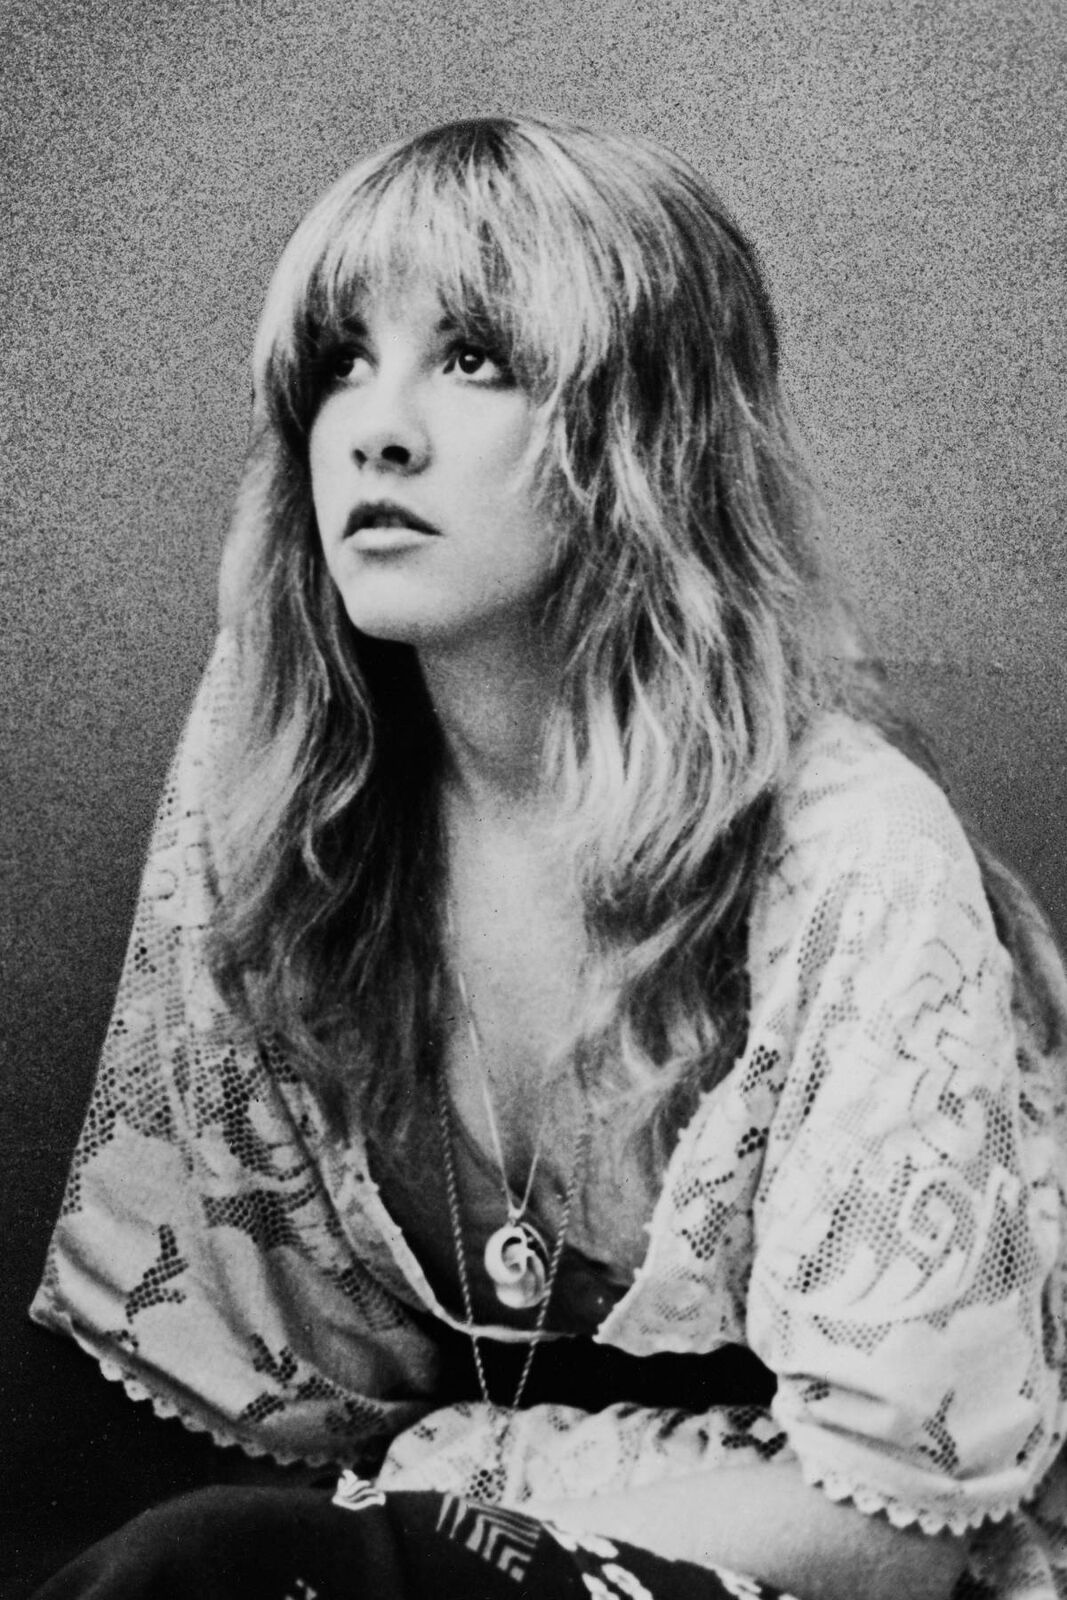 Stevie Nicks Looking Up 8x10 Picture Celebrity Print